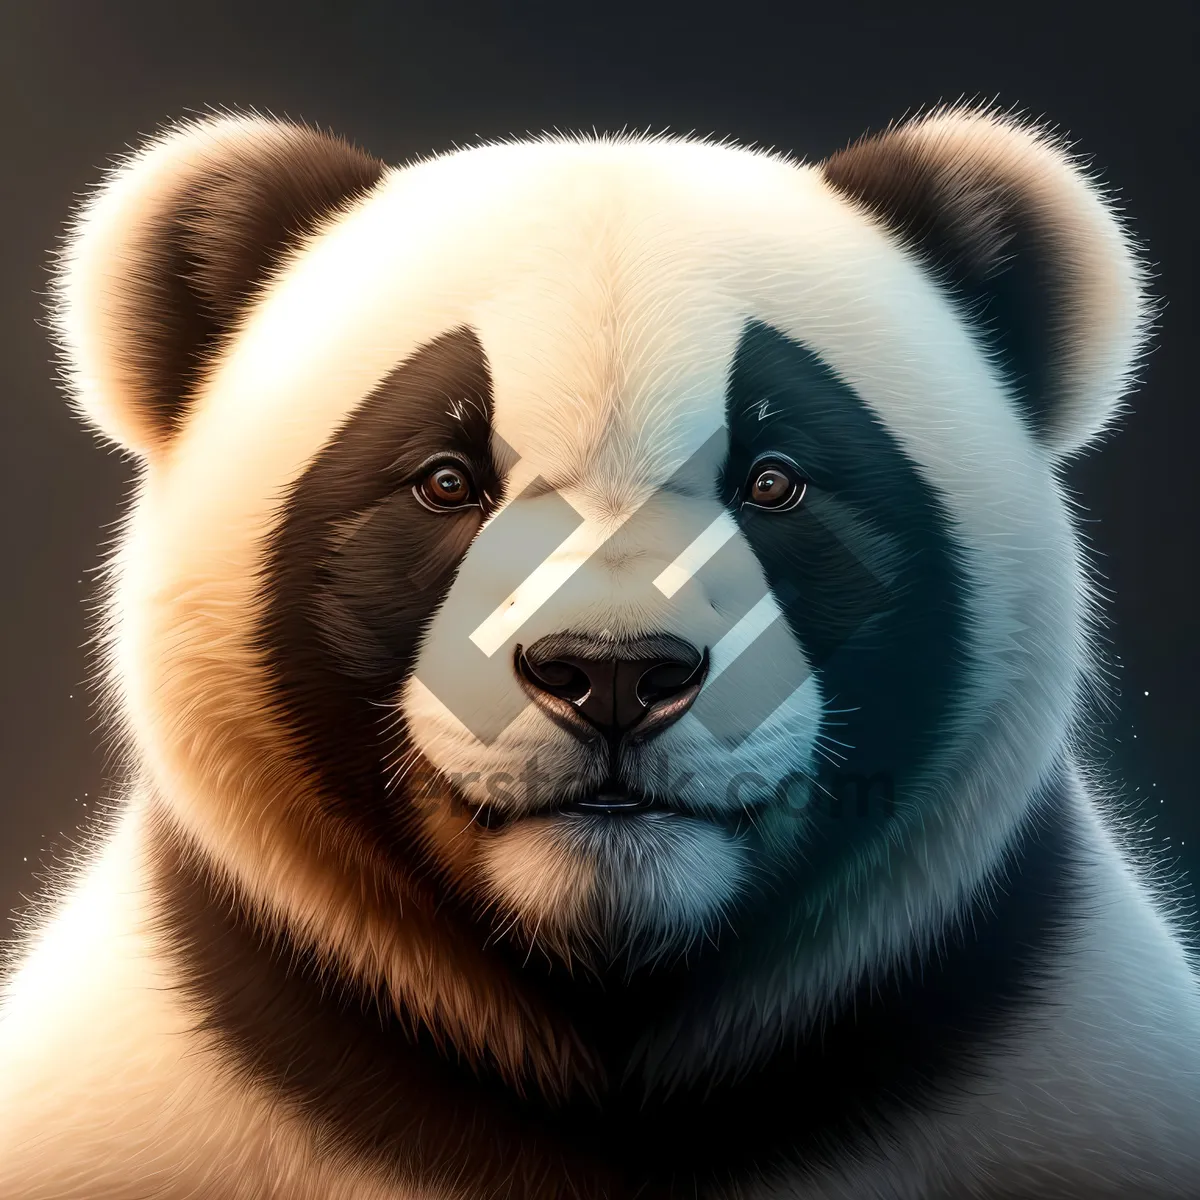 Picture of Cute Giant Panda Bear with Fluffy Fur"
or
"Adorable Wild Panda with Playful Nose